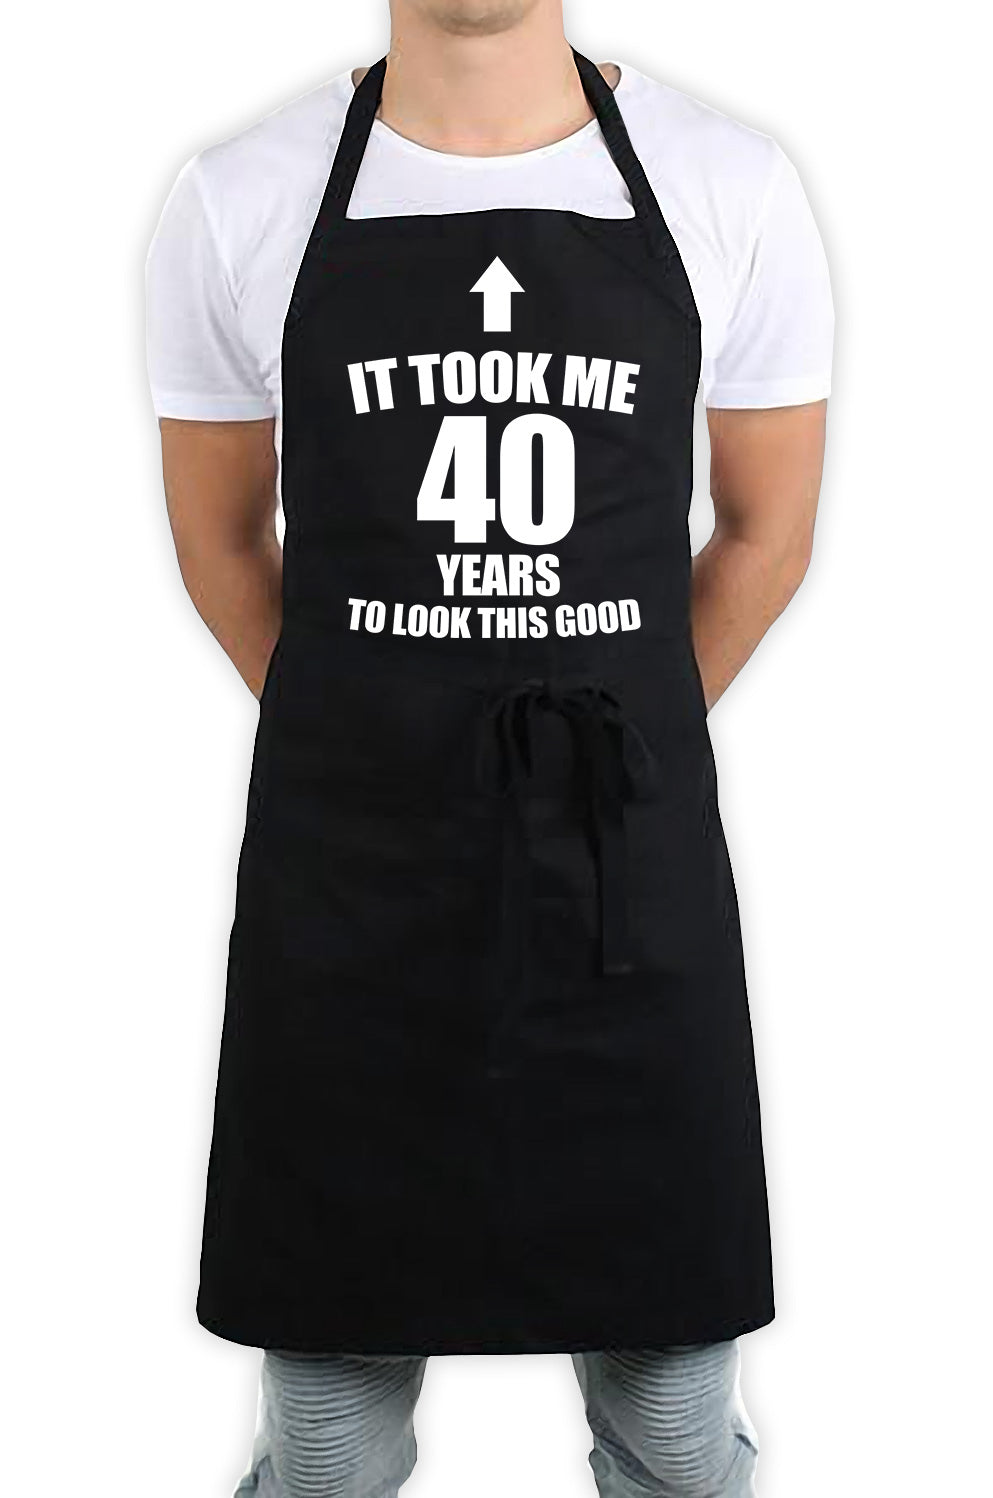 It Took Me 40 Years To Look This Good Funny Kitchen BBQ Apron Black